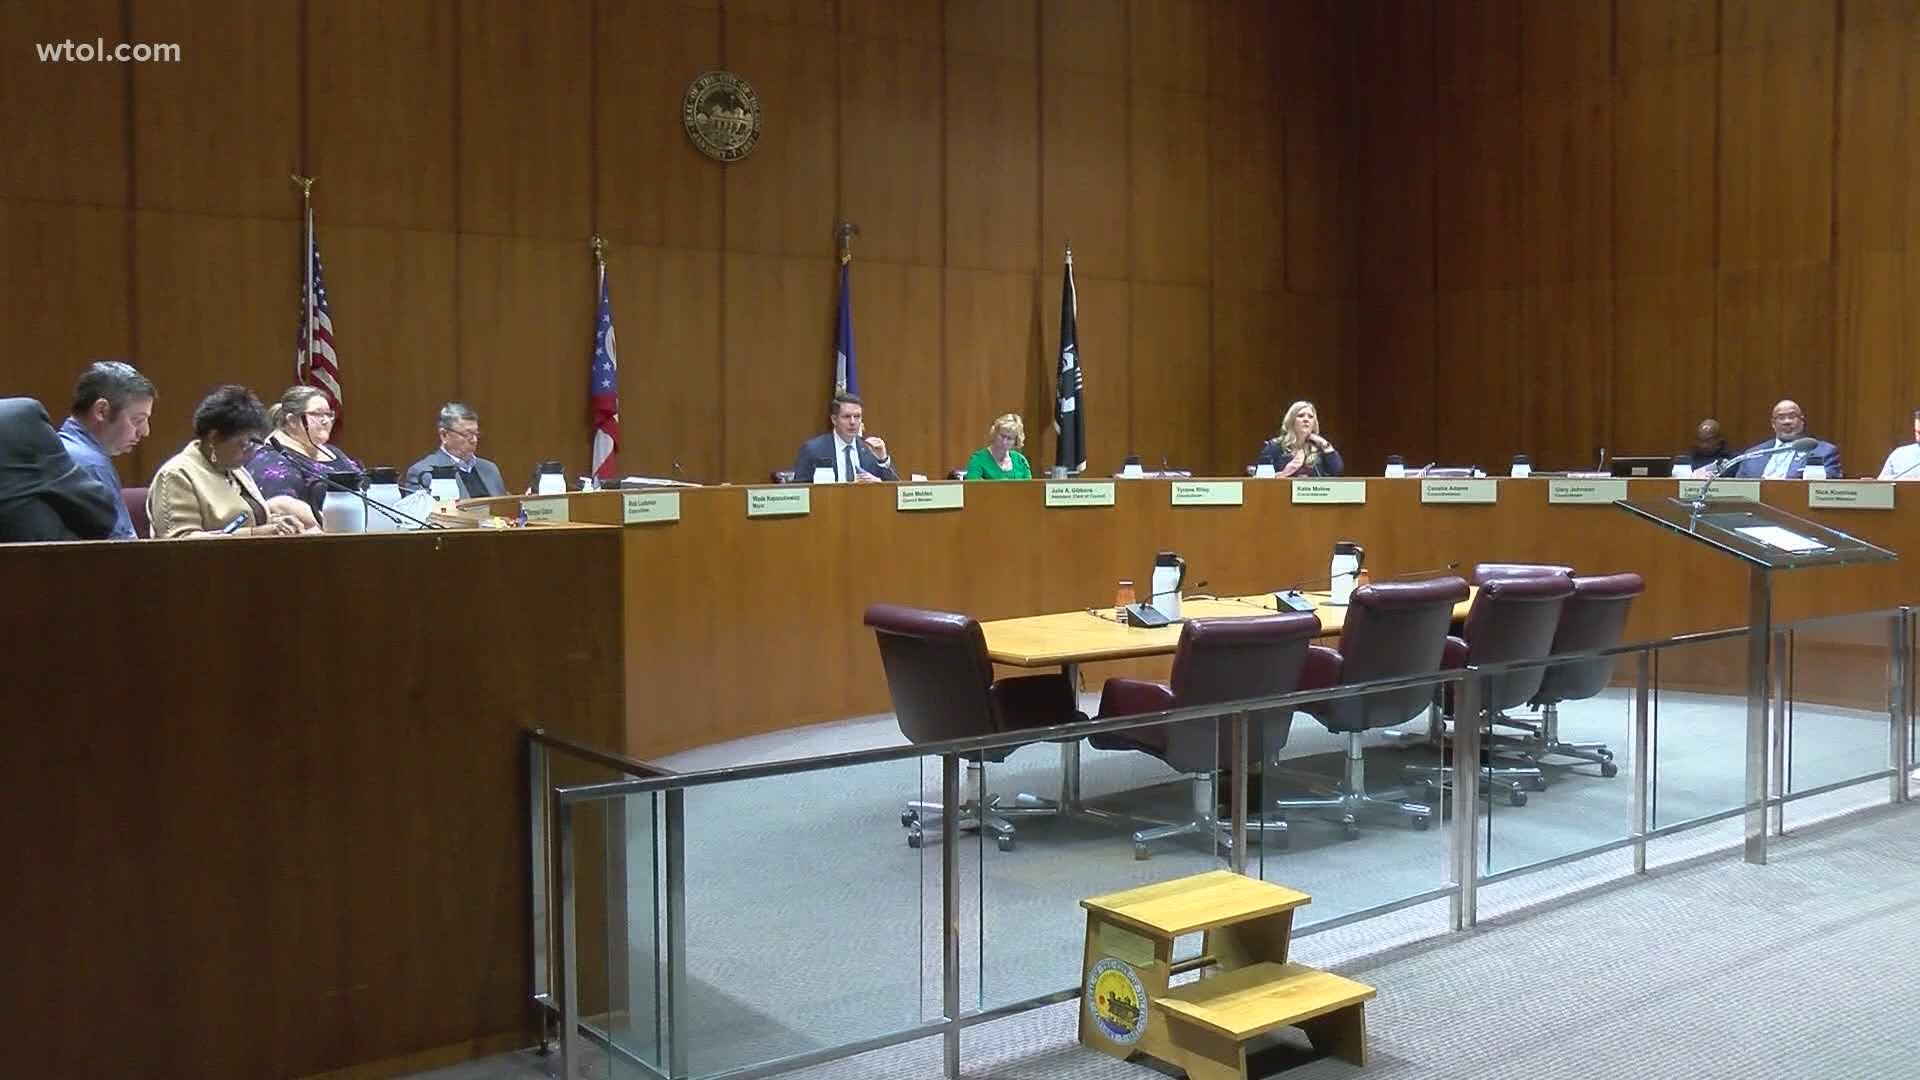 A vote on subpoena power to the police civilian review board was expected to take place.